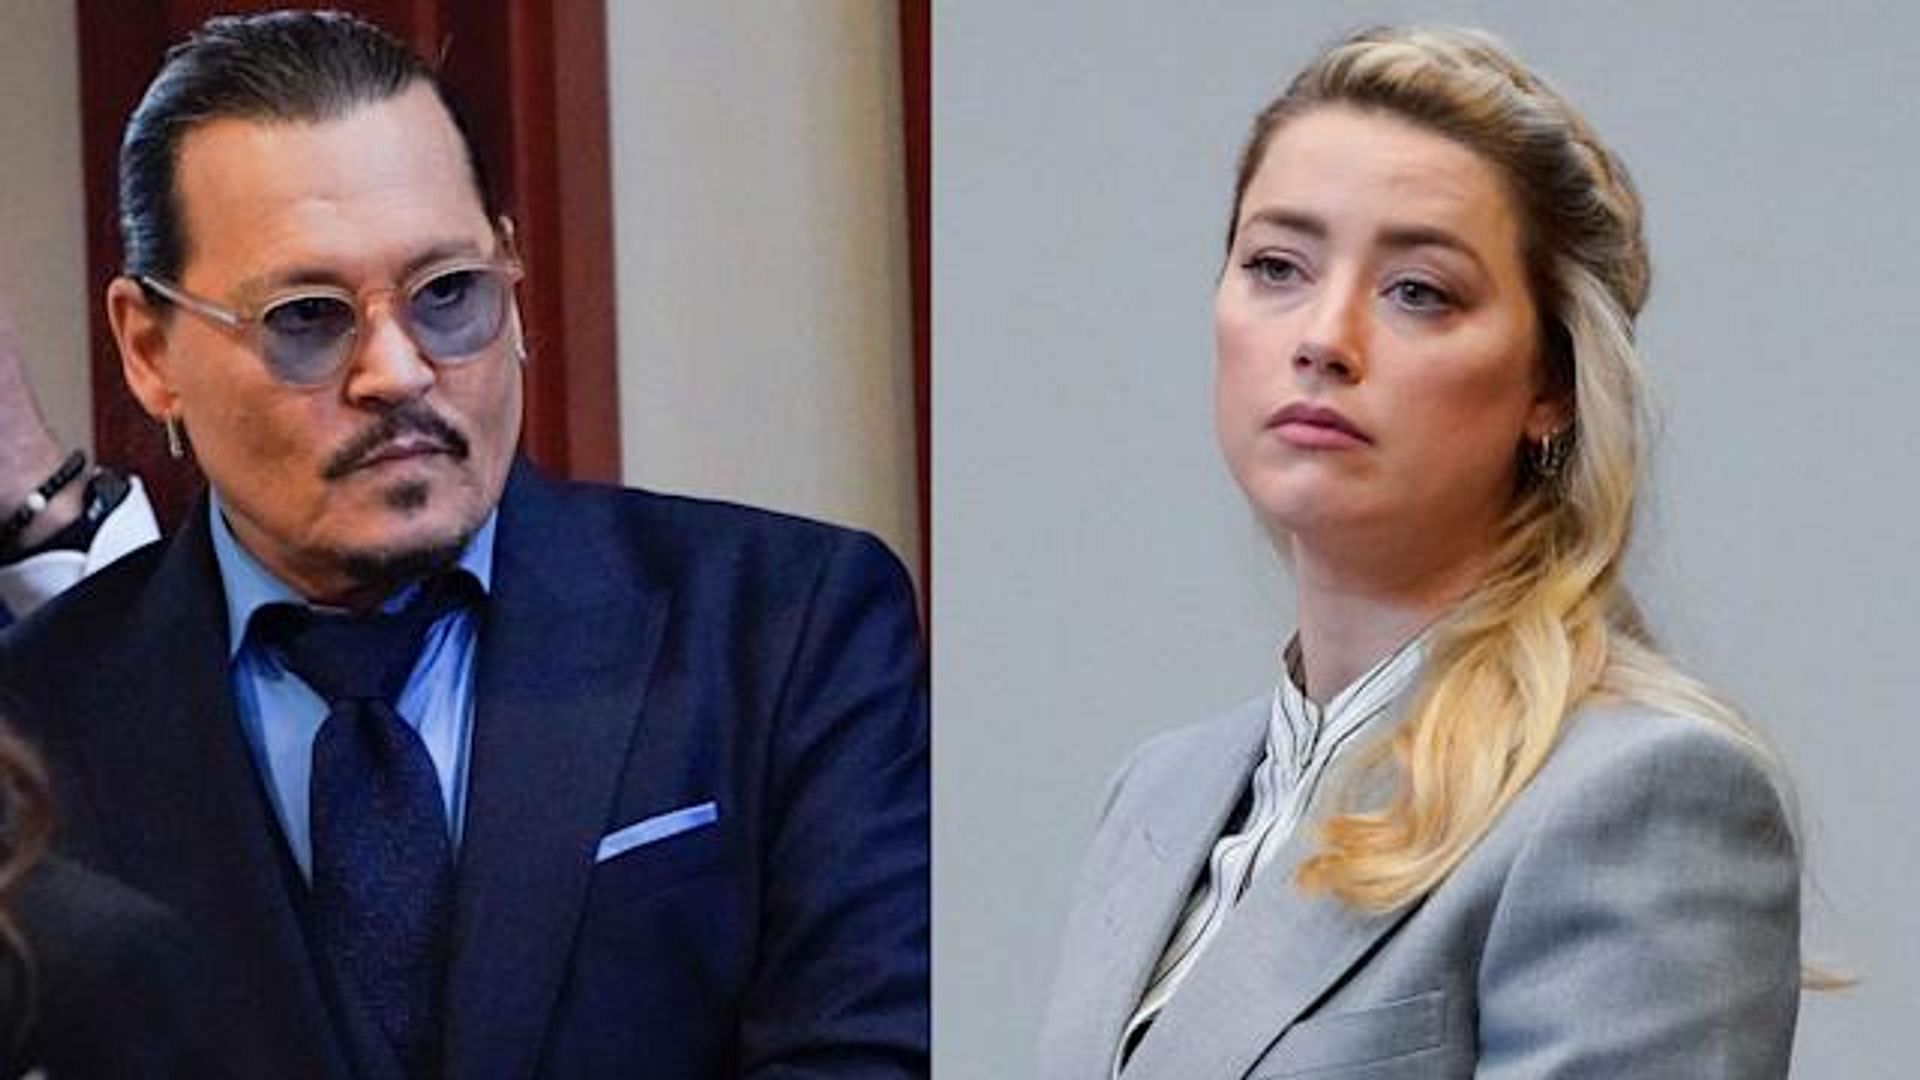 Johnny Depp and Amber Heard on Friday, May 27 at the trial (Image via GETTY IMAGES)